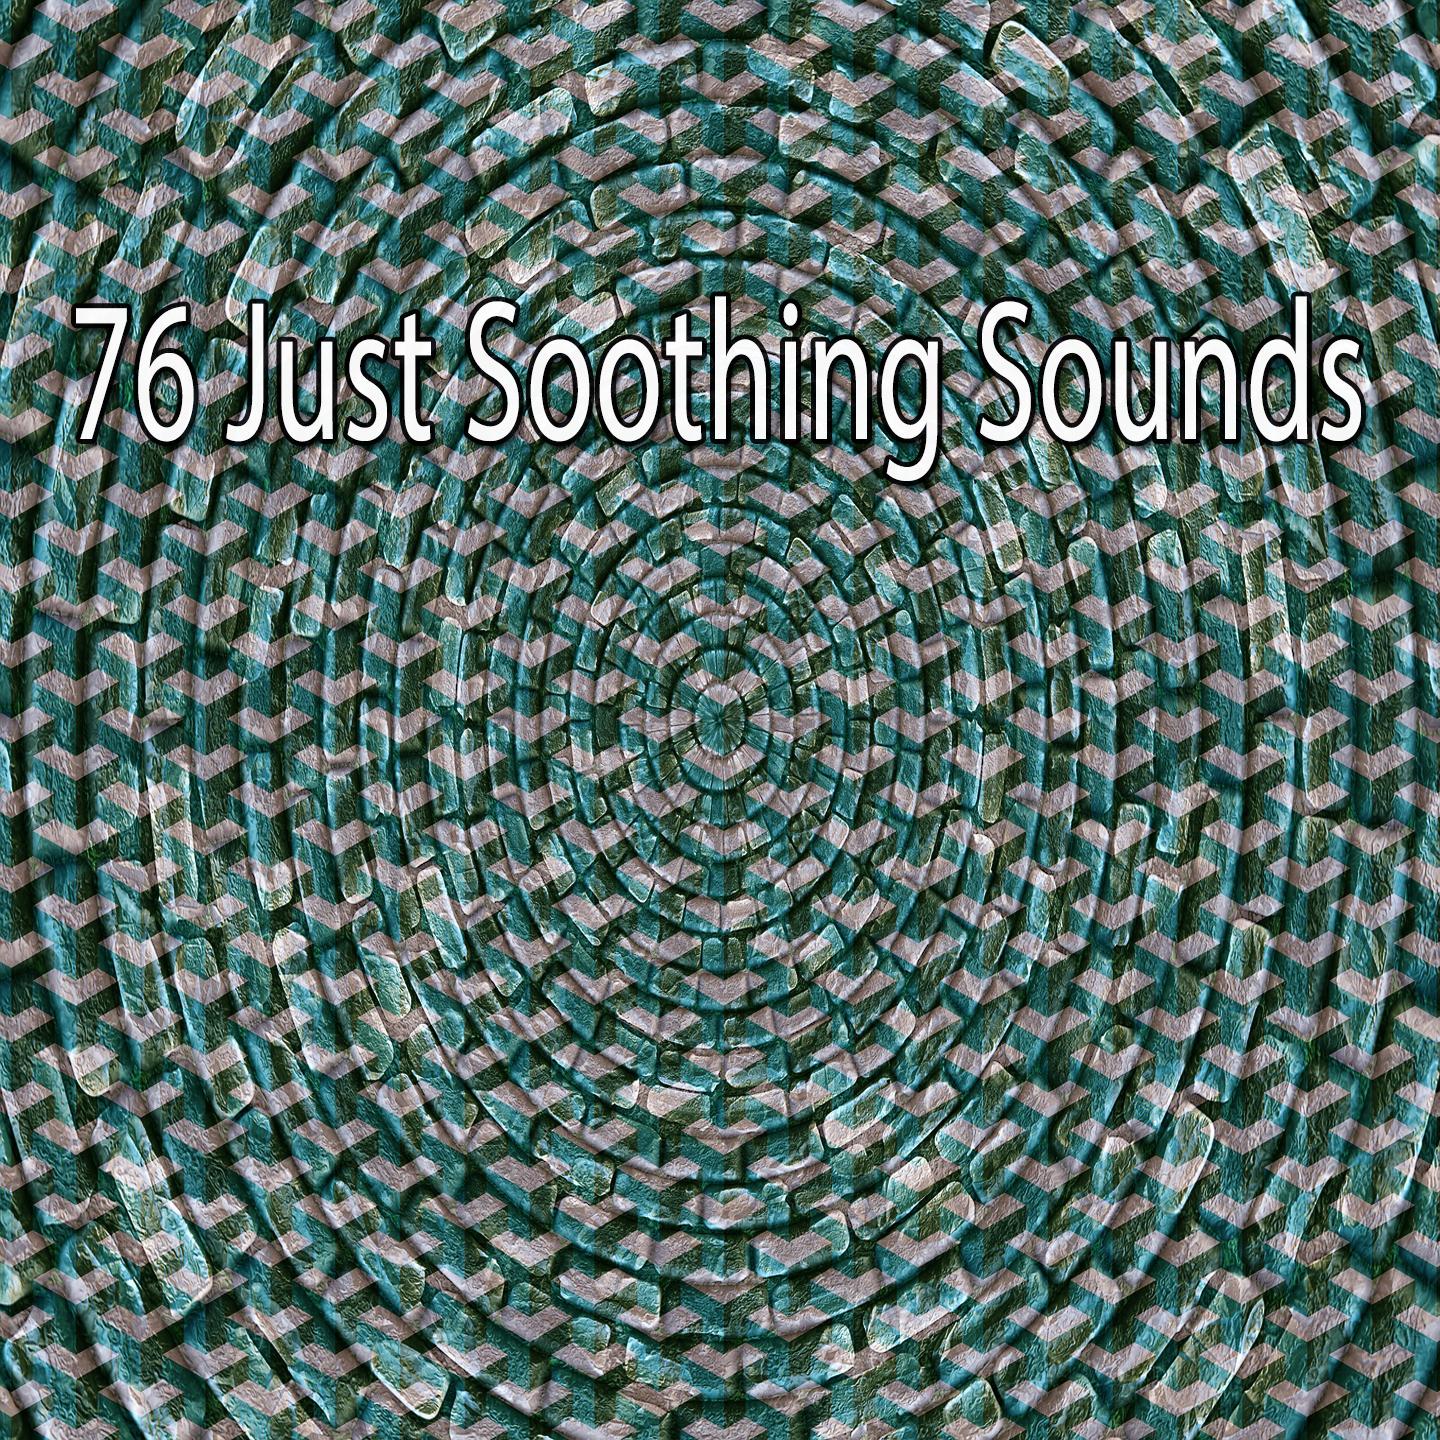 76 Just Soothing Sounds